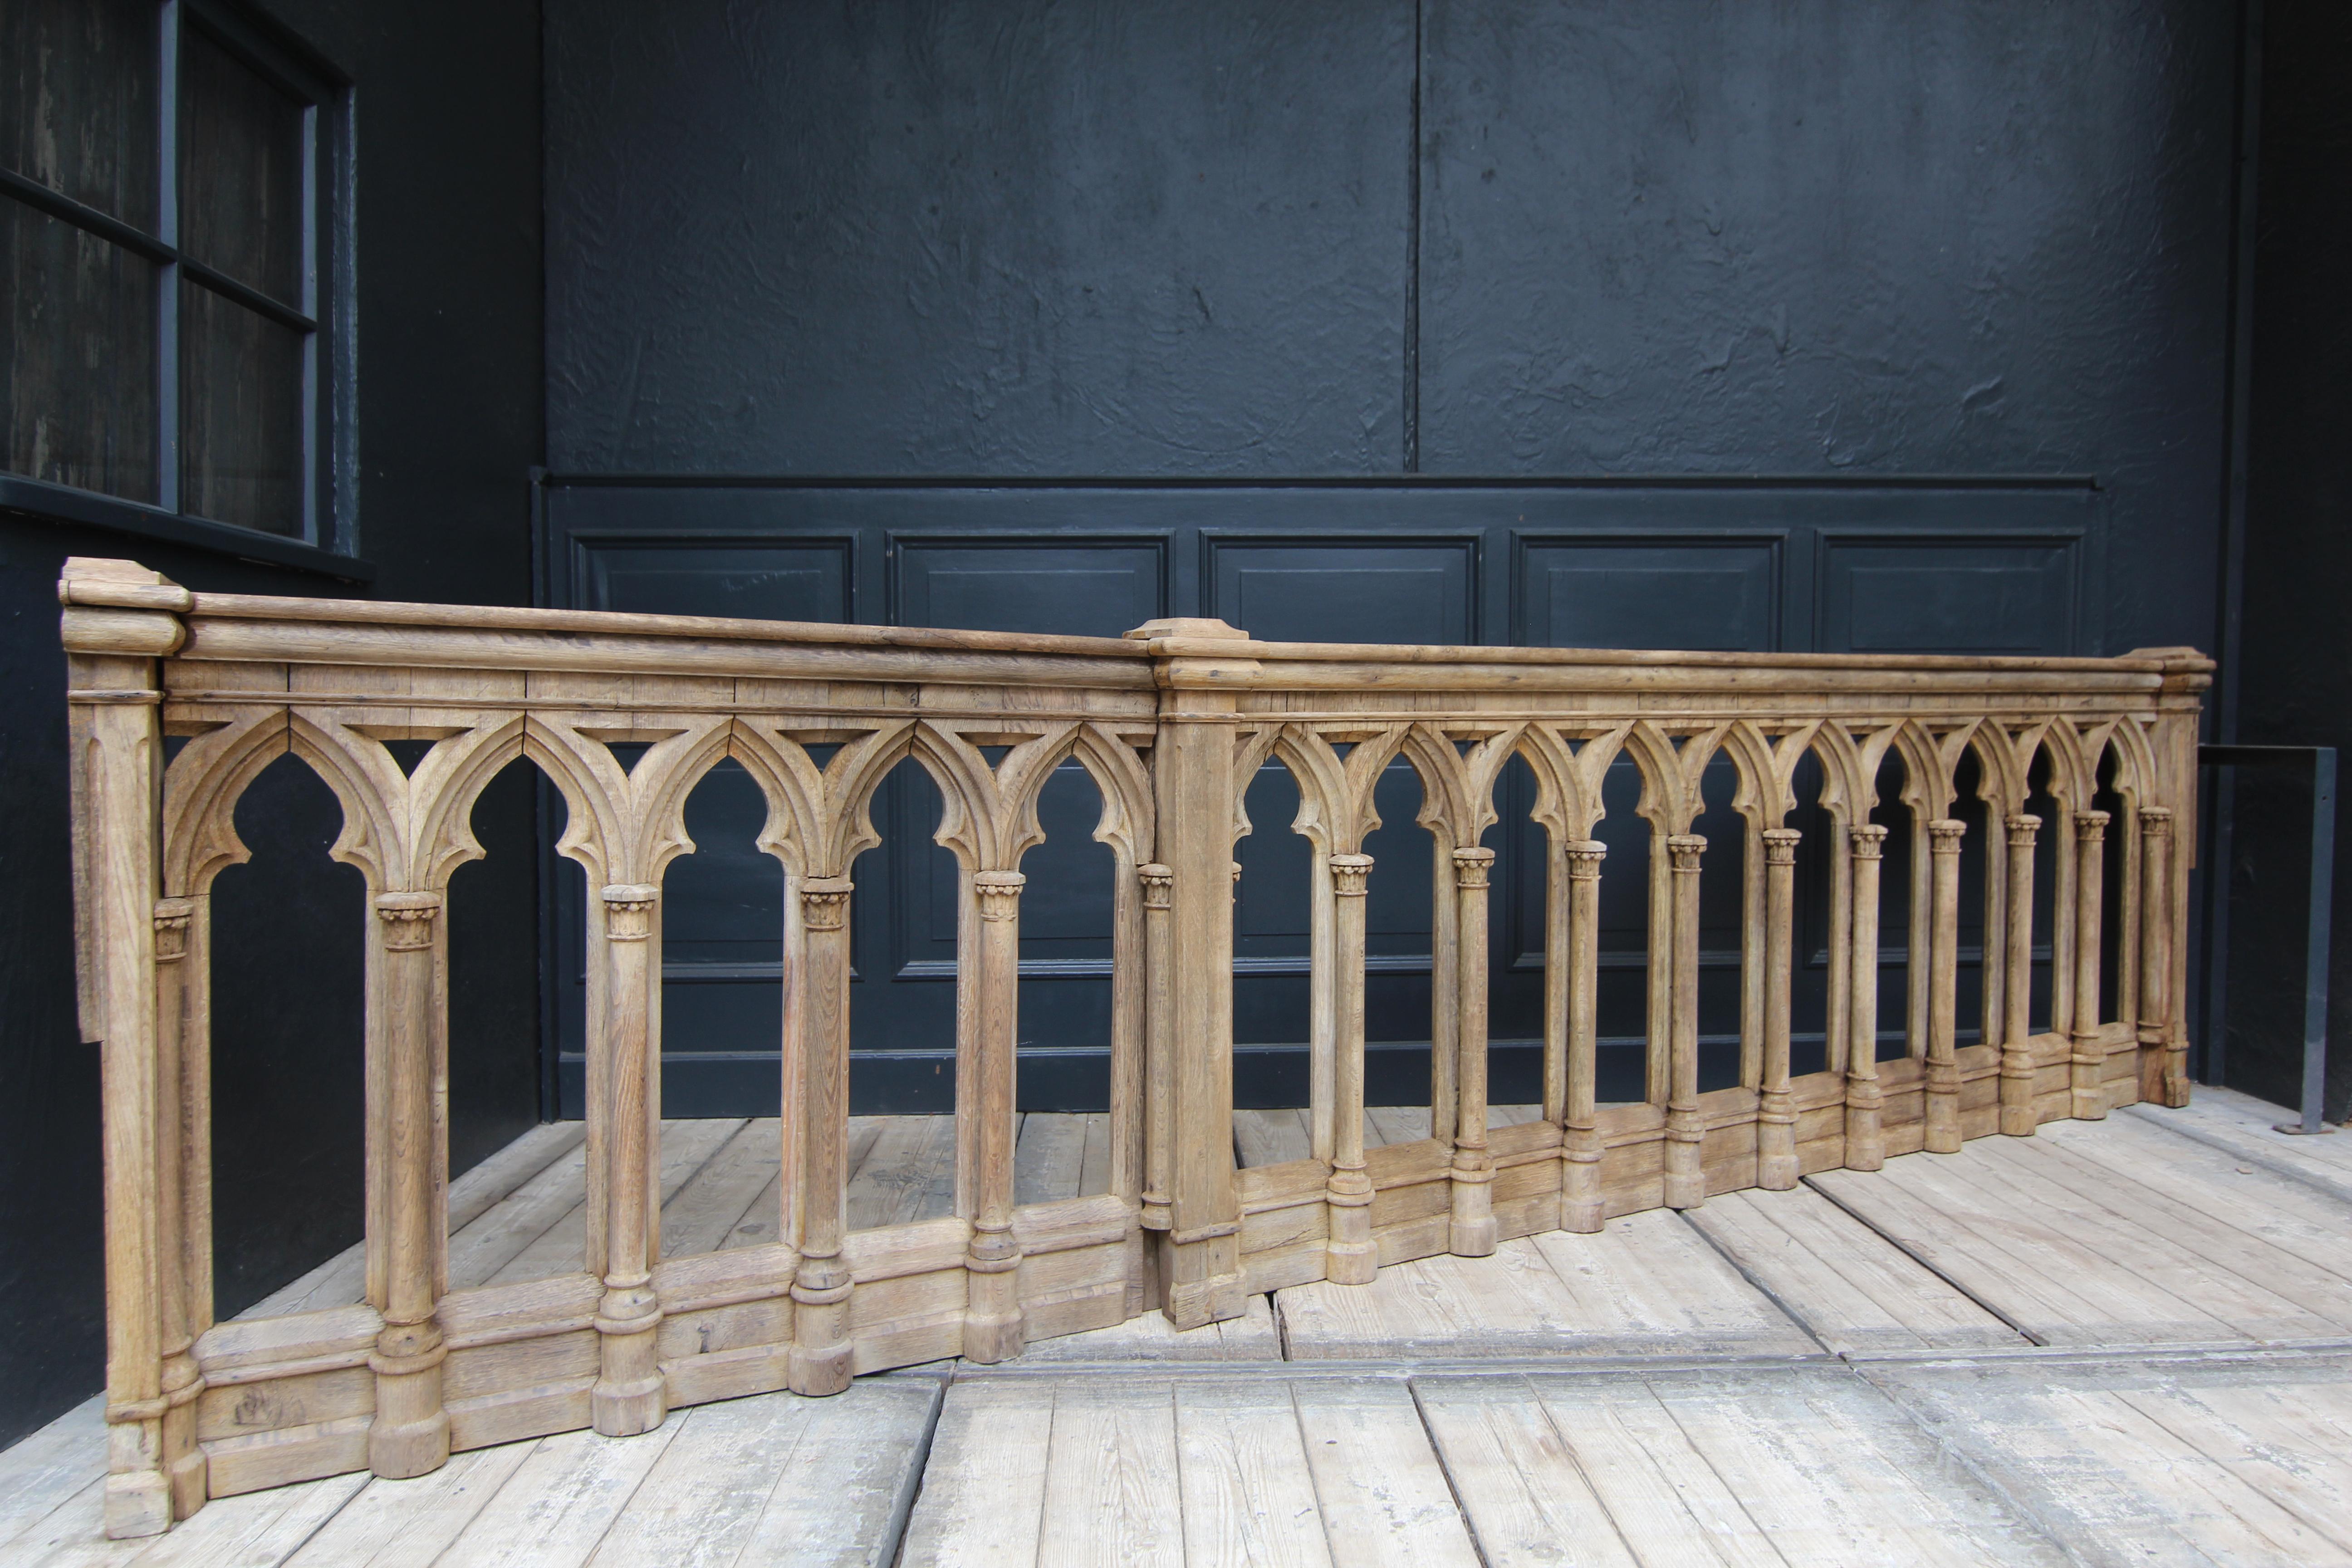 A late 19th century Gothic-Revival balustrade made and carved of solid oak wood.
In the form of Gothic blind tracery or arcades and fronting round columns with highly simplified small Corinthian capitals.

The balustrade comes from a courtroom.